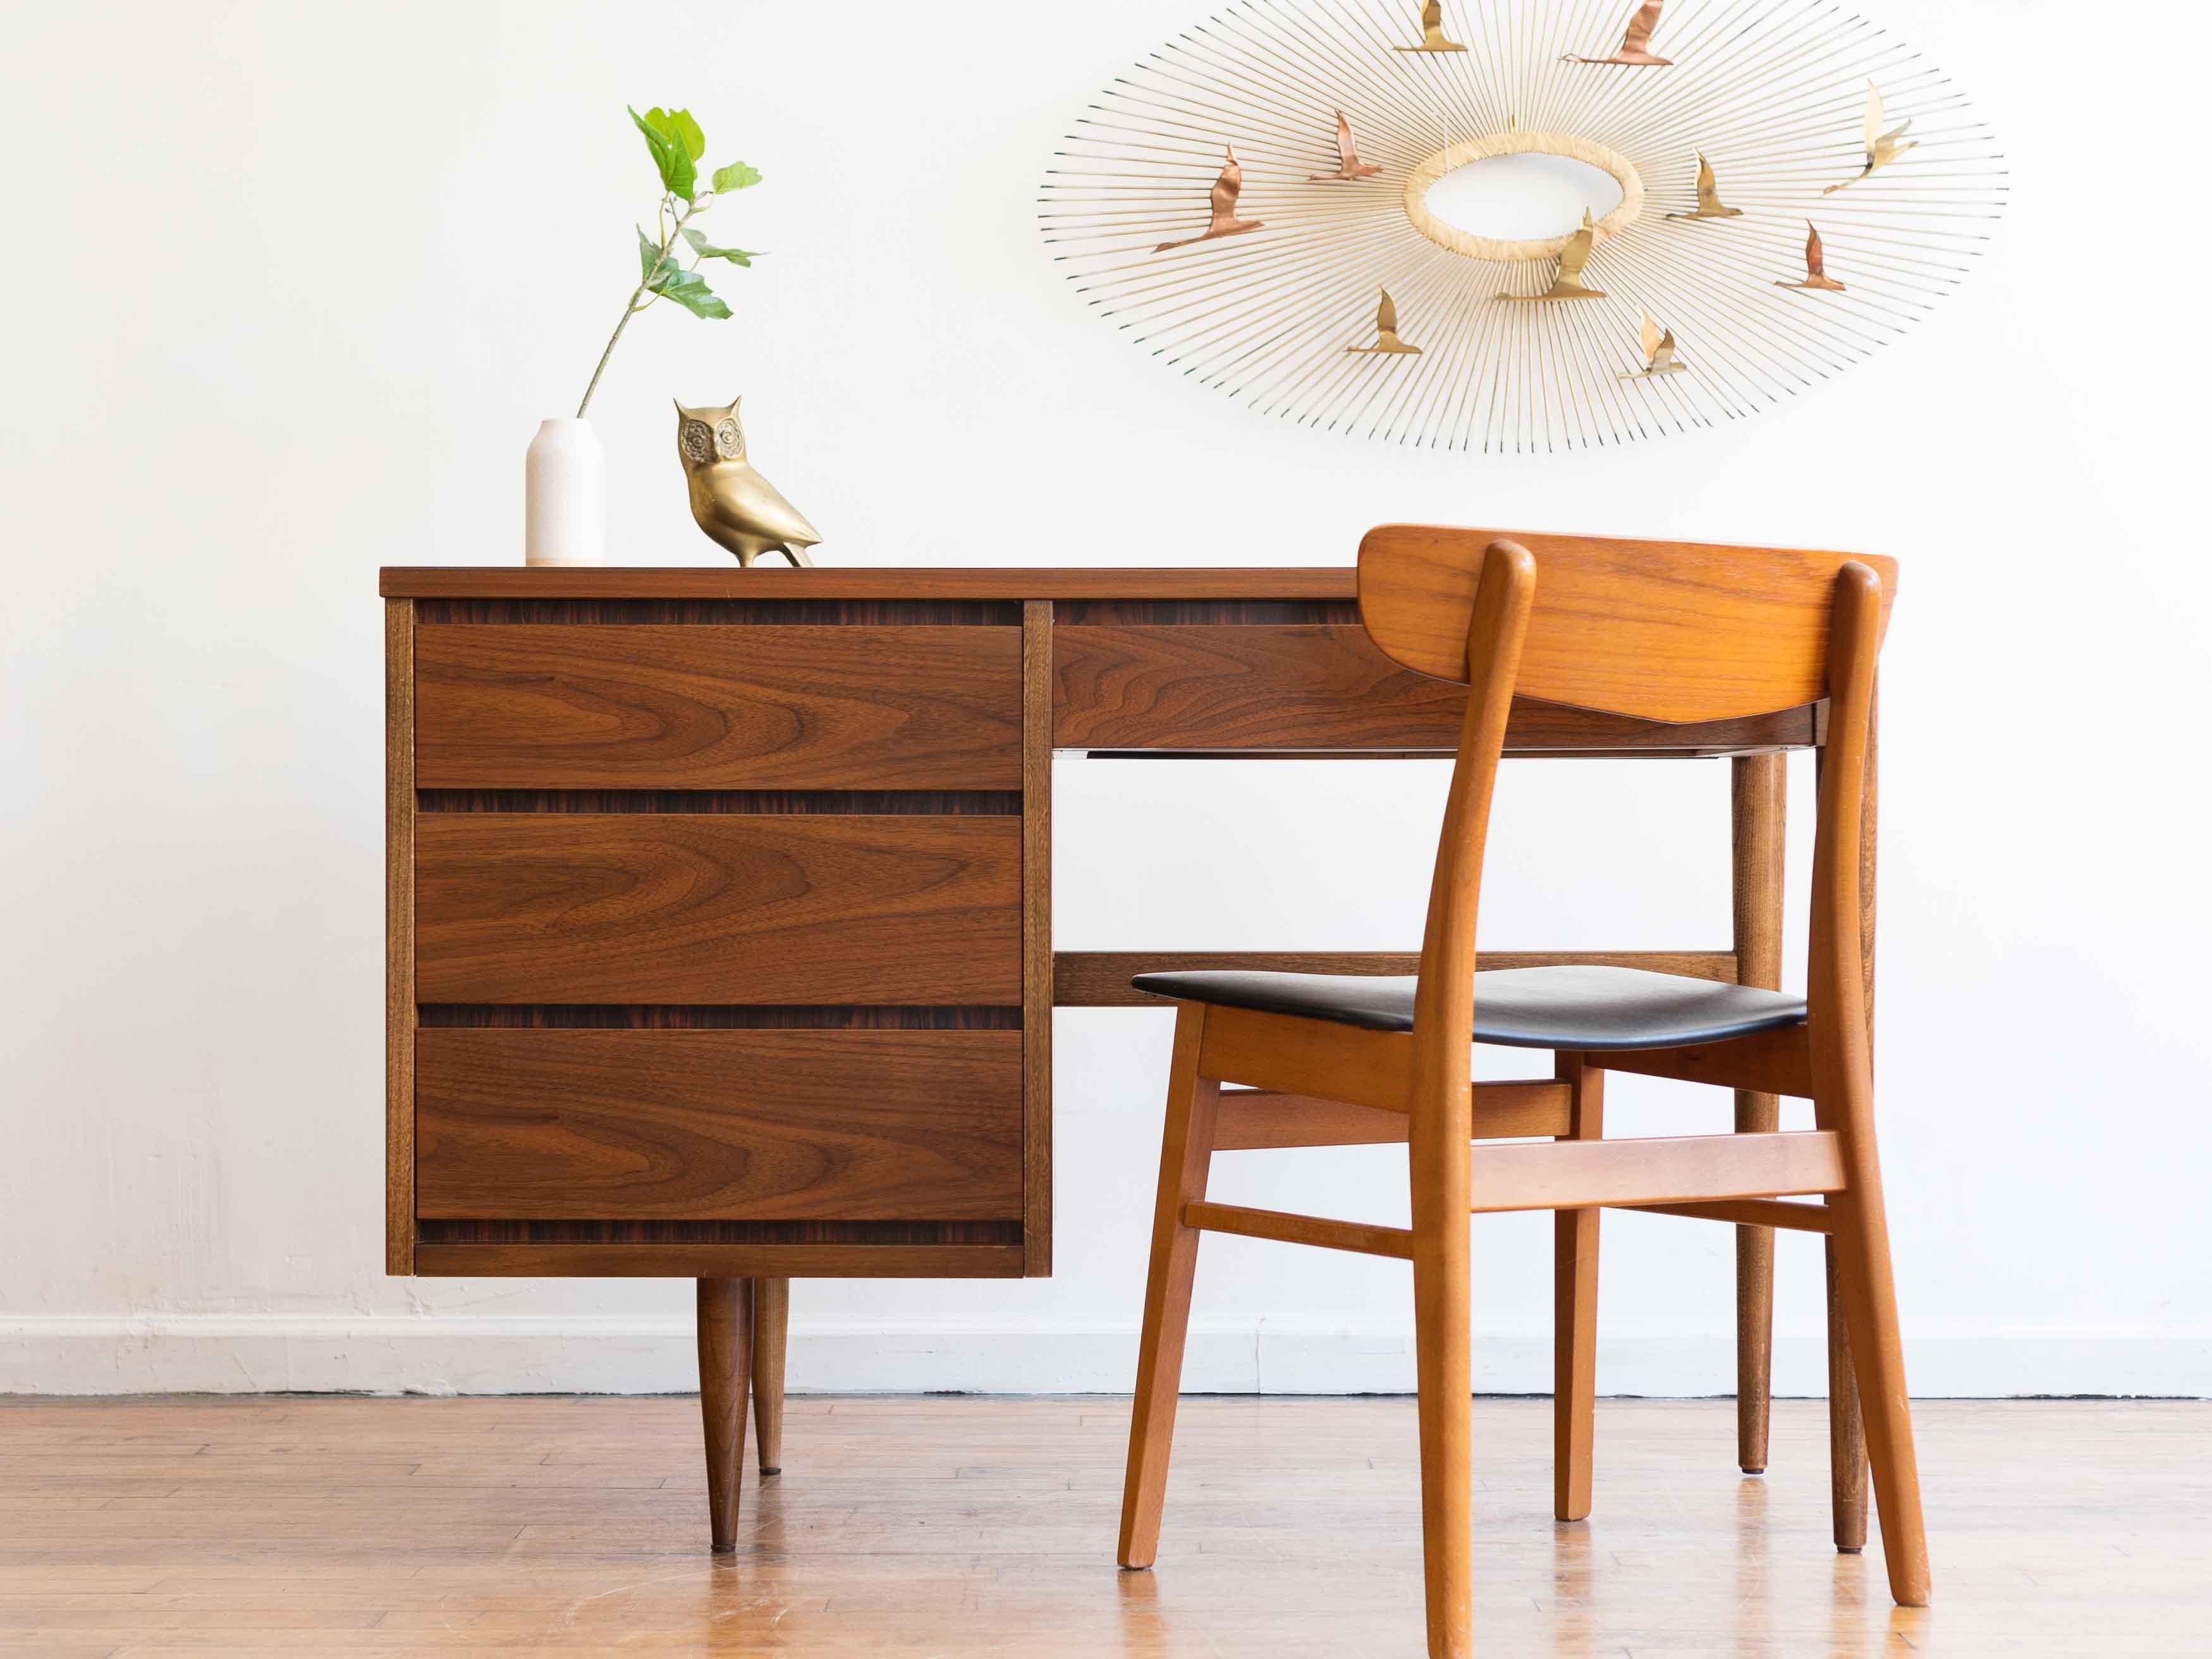 46” x 18” x 30.5”H; knee hole 23.5” x 25”H

Cute classic mid-century writing desk in walnut

•three side drawers
•smaller pencil drawer on the right
•faux rosewood trim
•tapered legs
•grain matched walnut on the drawers and top

Very good vintage